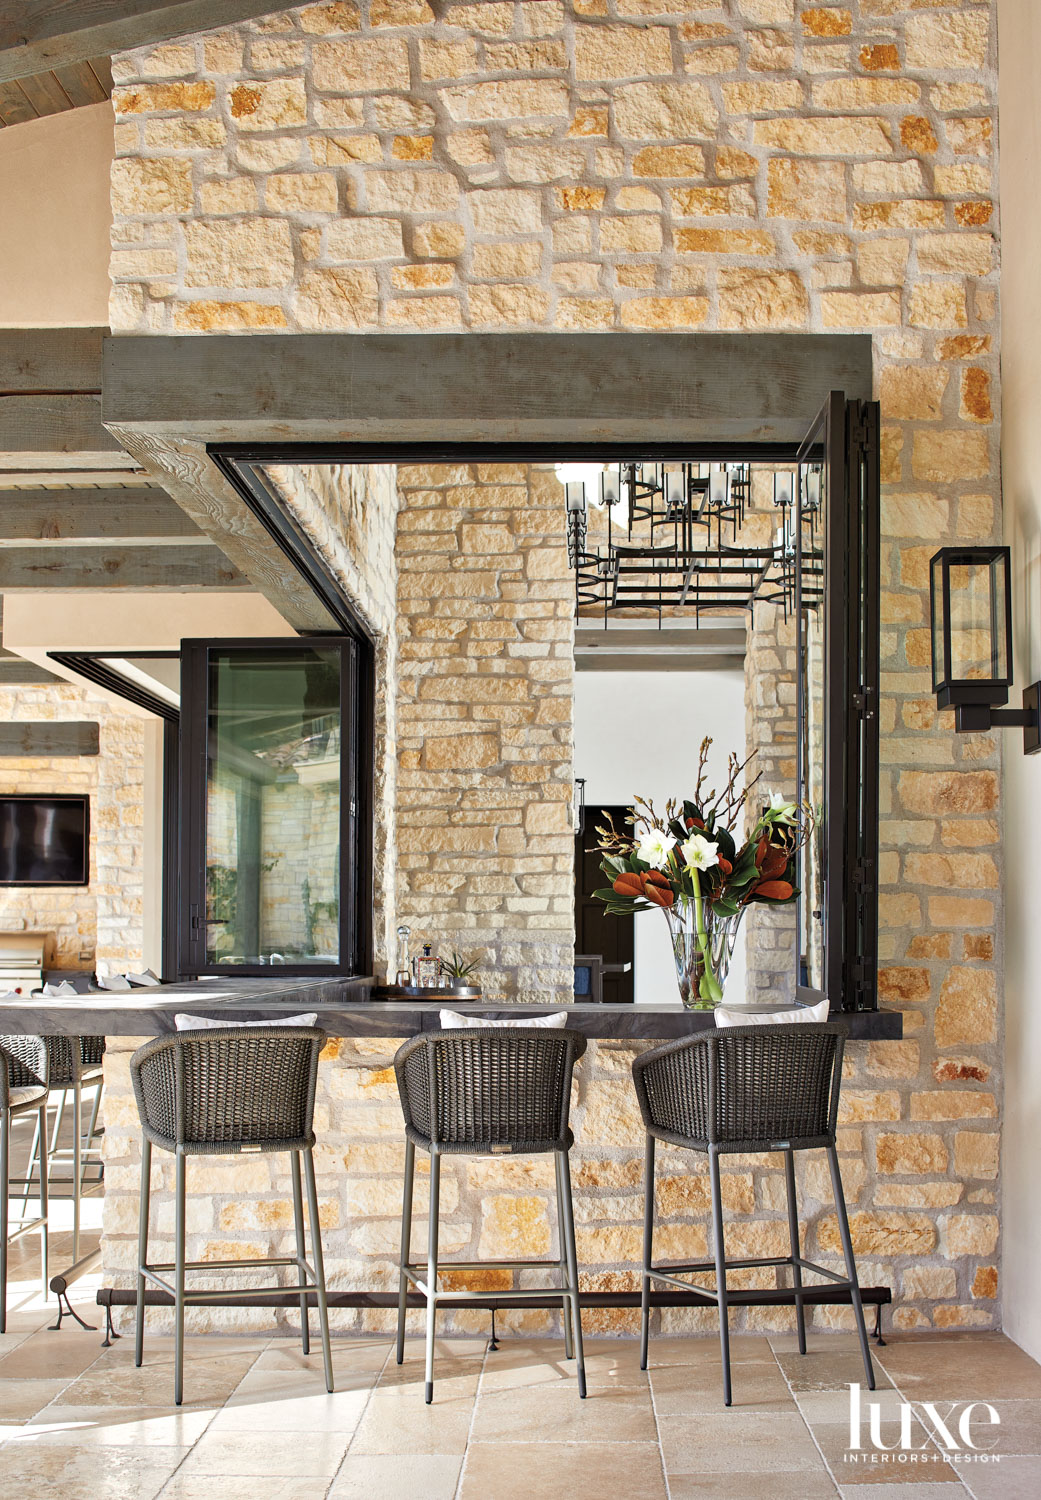 A patio bar with three black stools lined up along it.